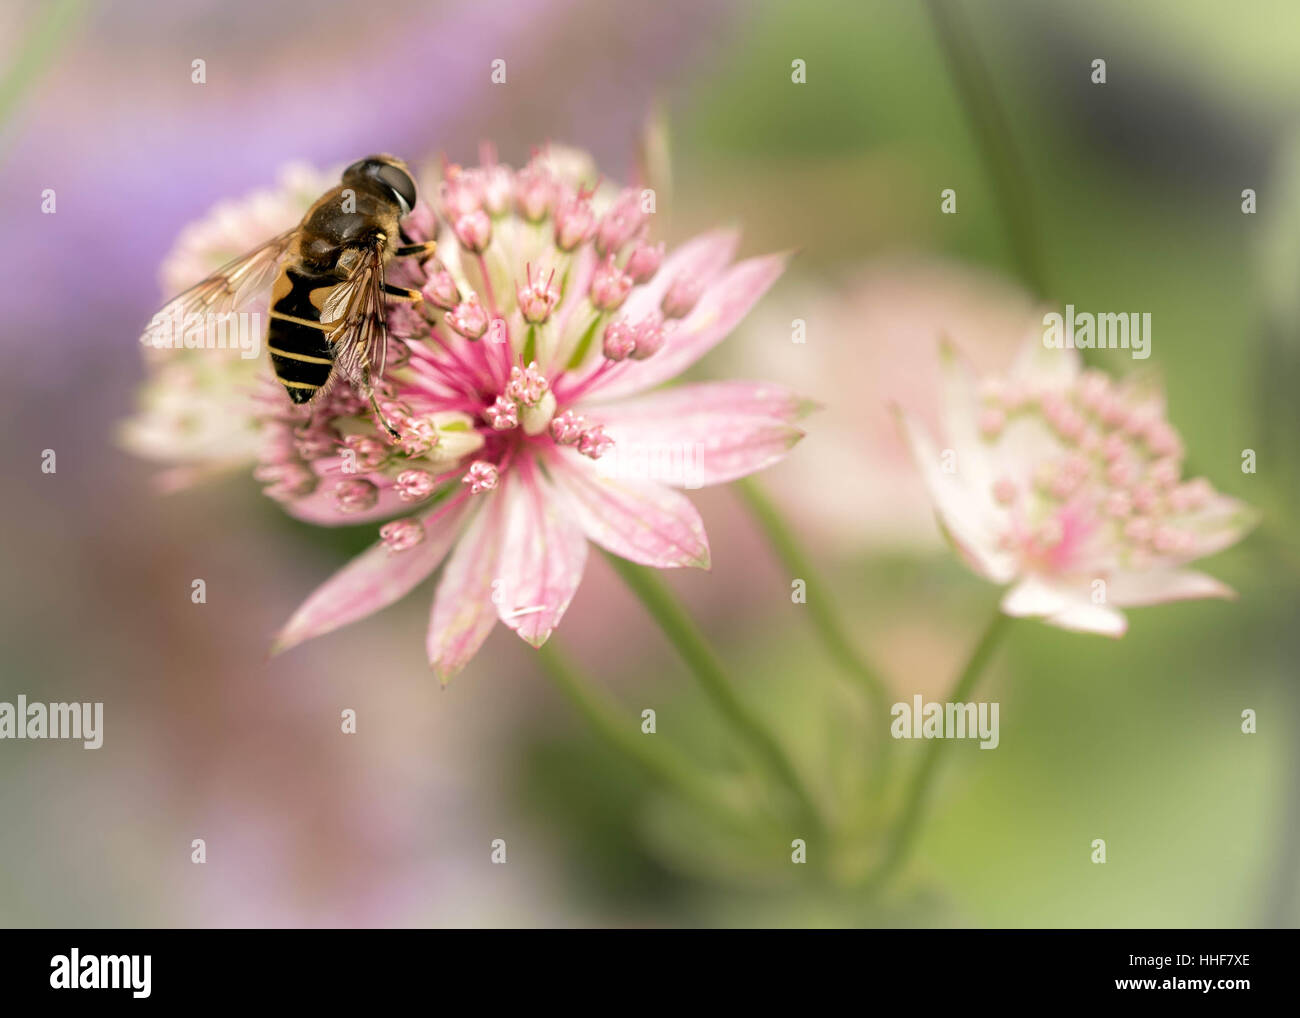 Macro of a stripey hoverfly resting on a pink flower in a herbaceous border Stock Photo